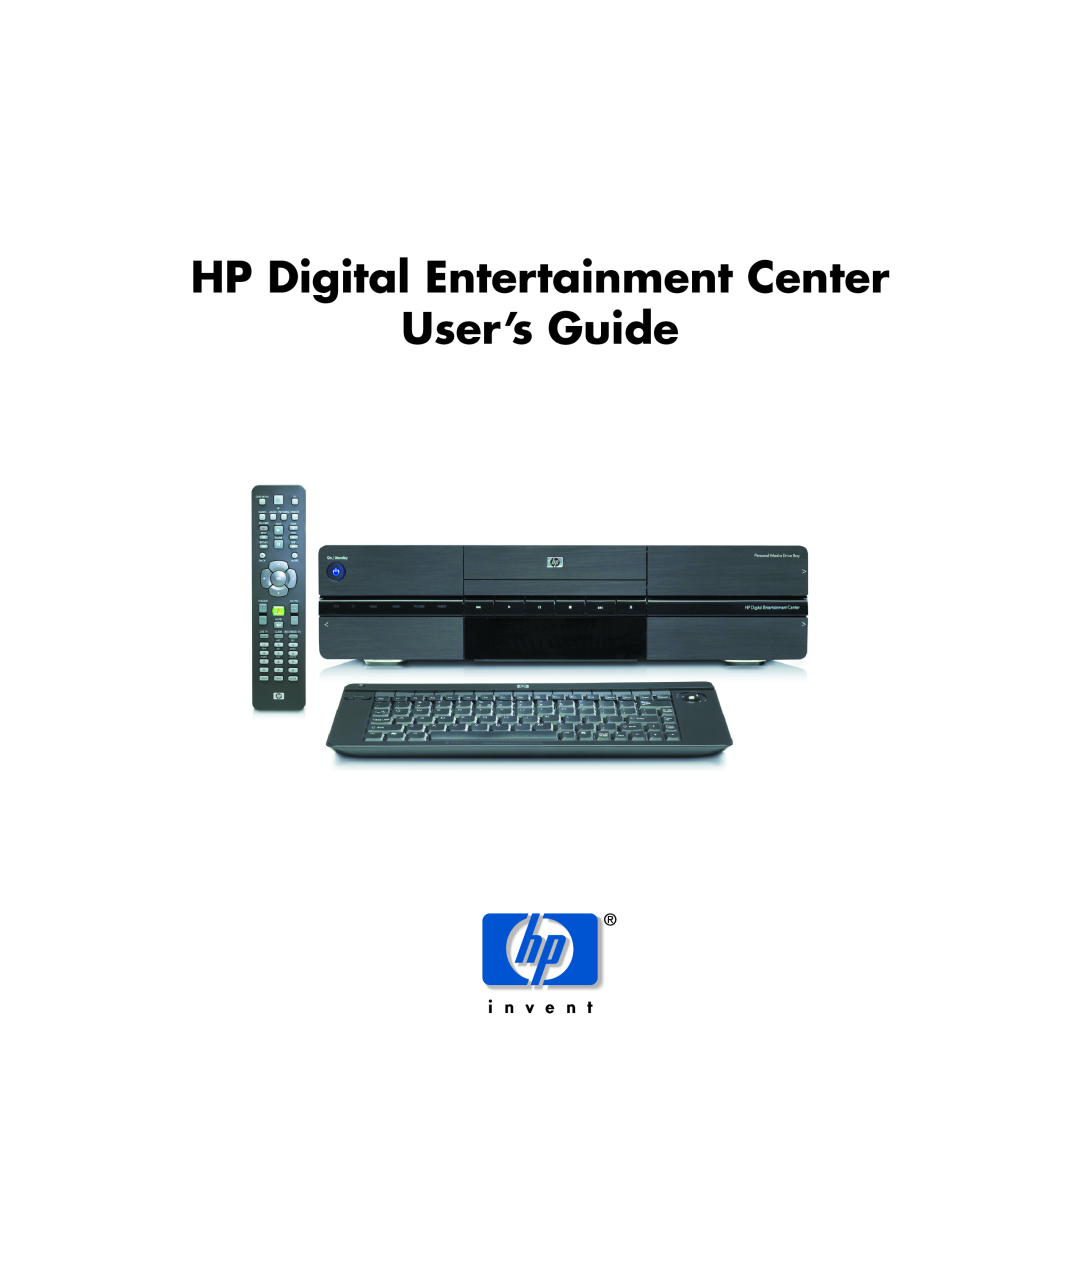 HP z552, z557 manual Warranty and Support Guide, HP Digital Entertainment Center, Purchase Date 